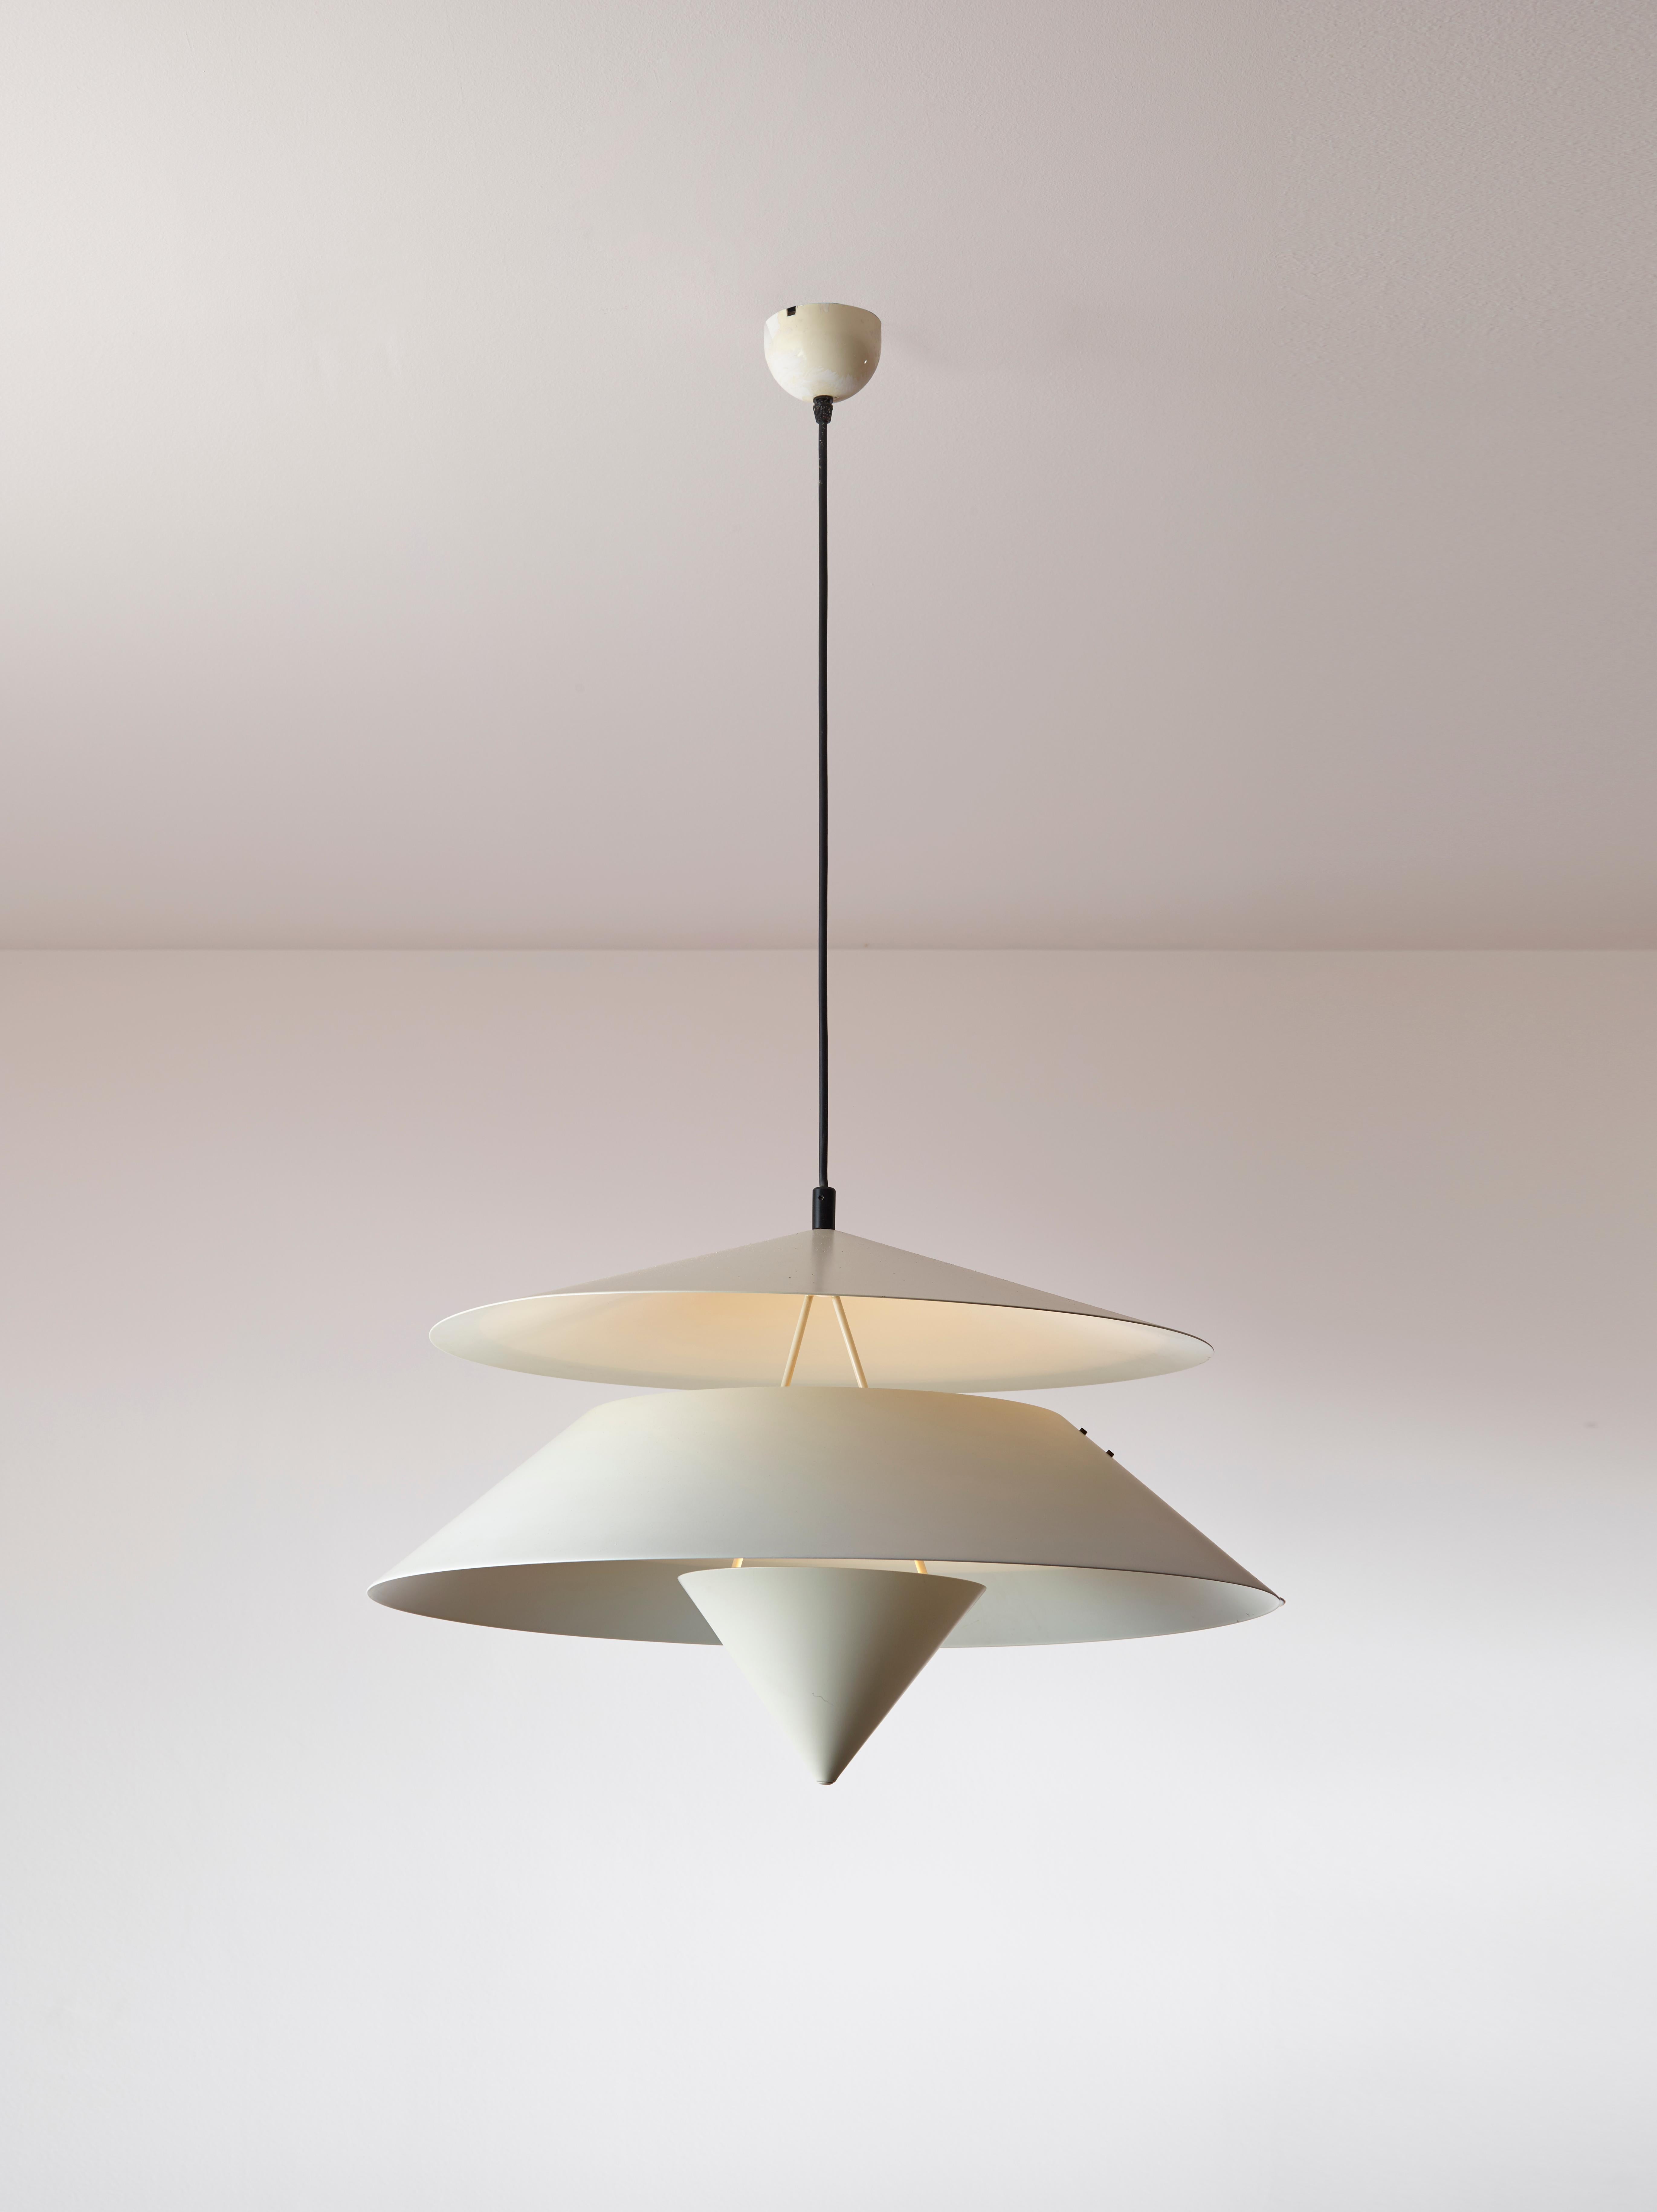 An Italian Modern White Lacquered Metal Akaari Chandelier, designed by Vico Magistretti for Oluce in 1985, from the Kalaari series. 

Crafted from matt white enamelled metal, this chandelier exhibits a distinctive three-part design: a conical top, a